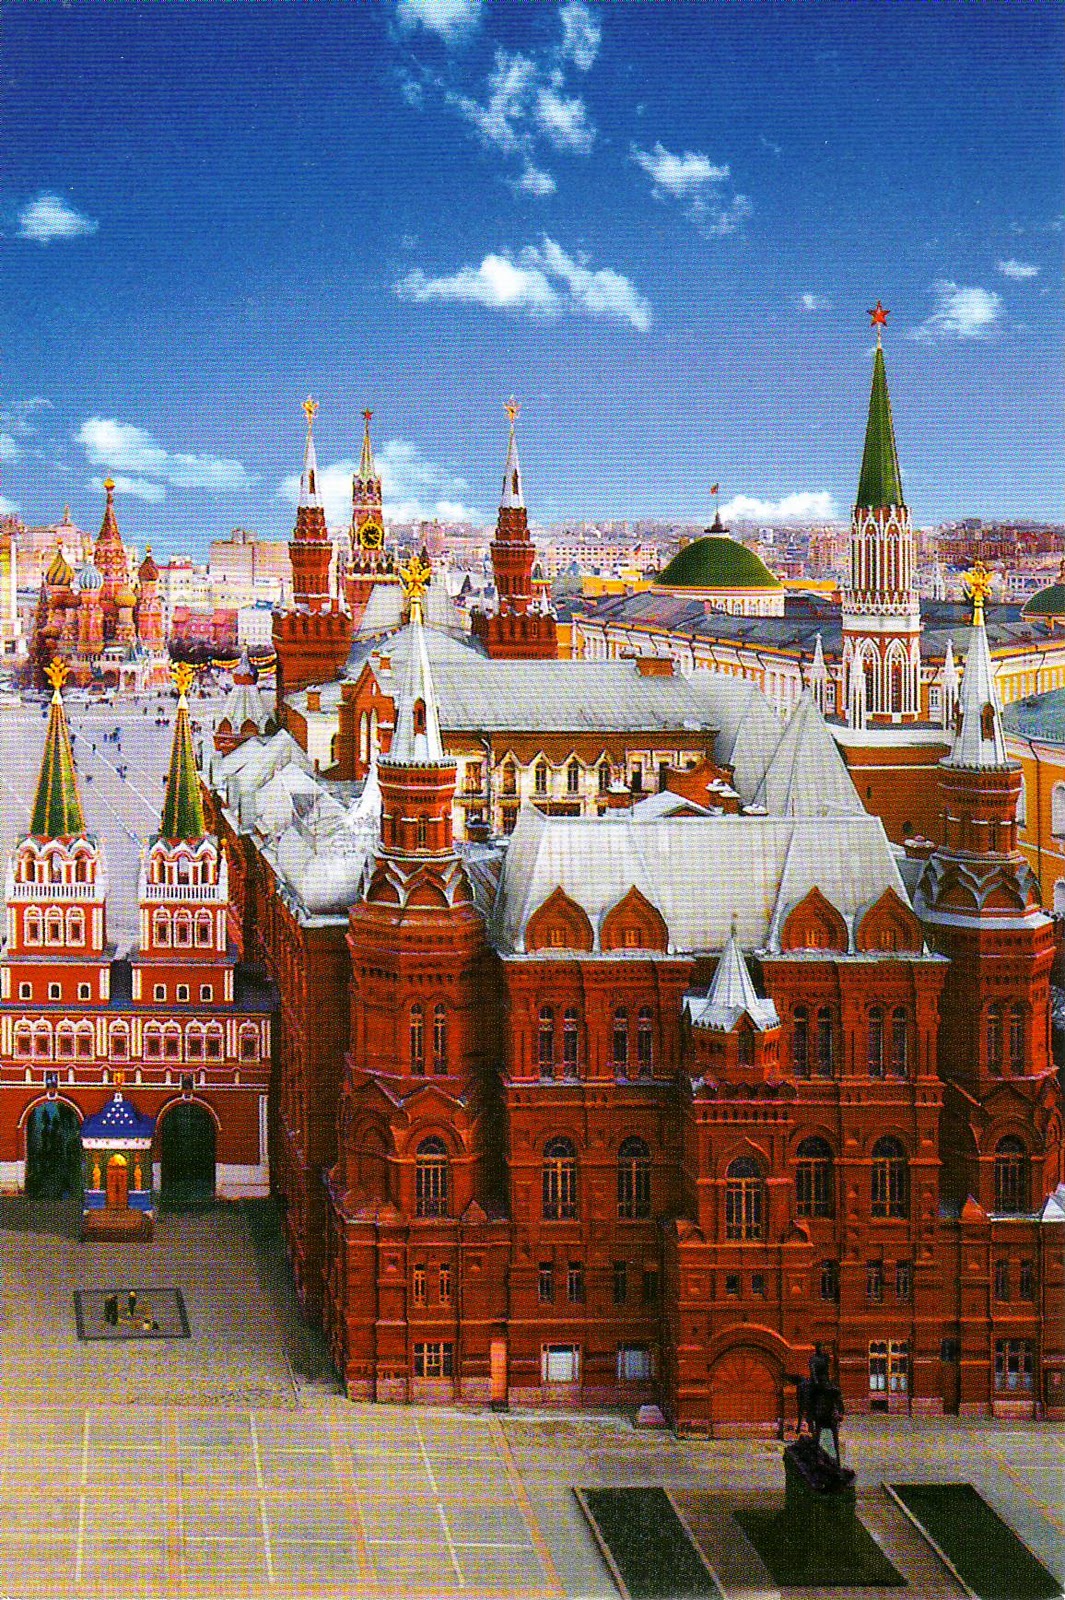 Moonlights UNESCO WHS Blog: Russia - Kremlin and Red Square, Moscow